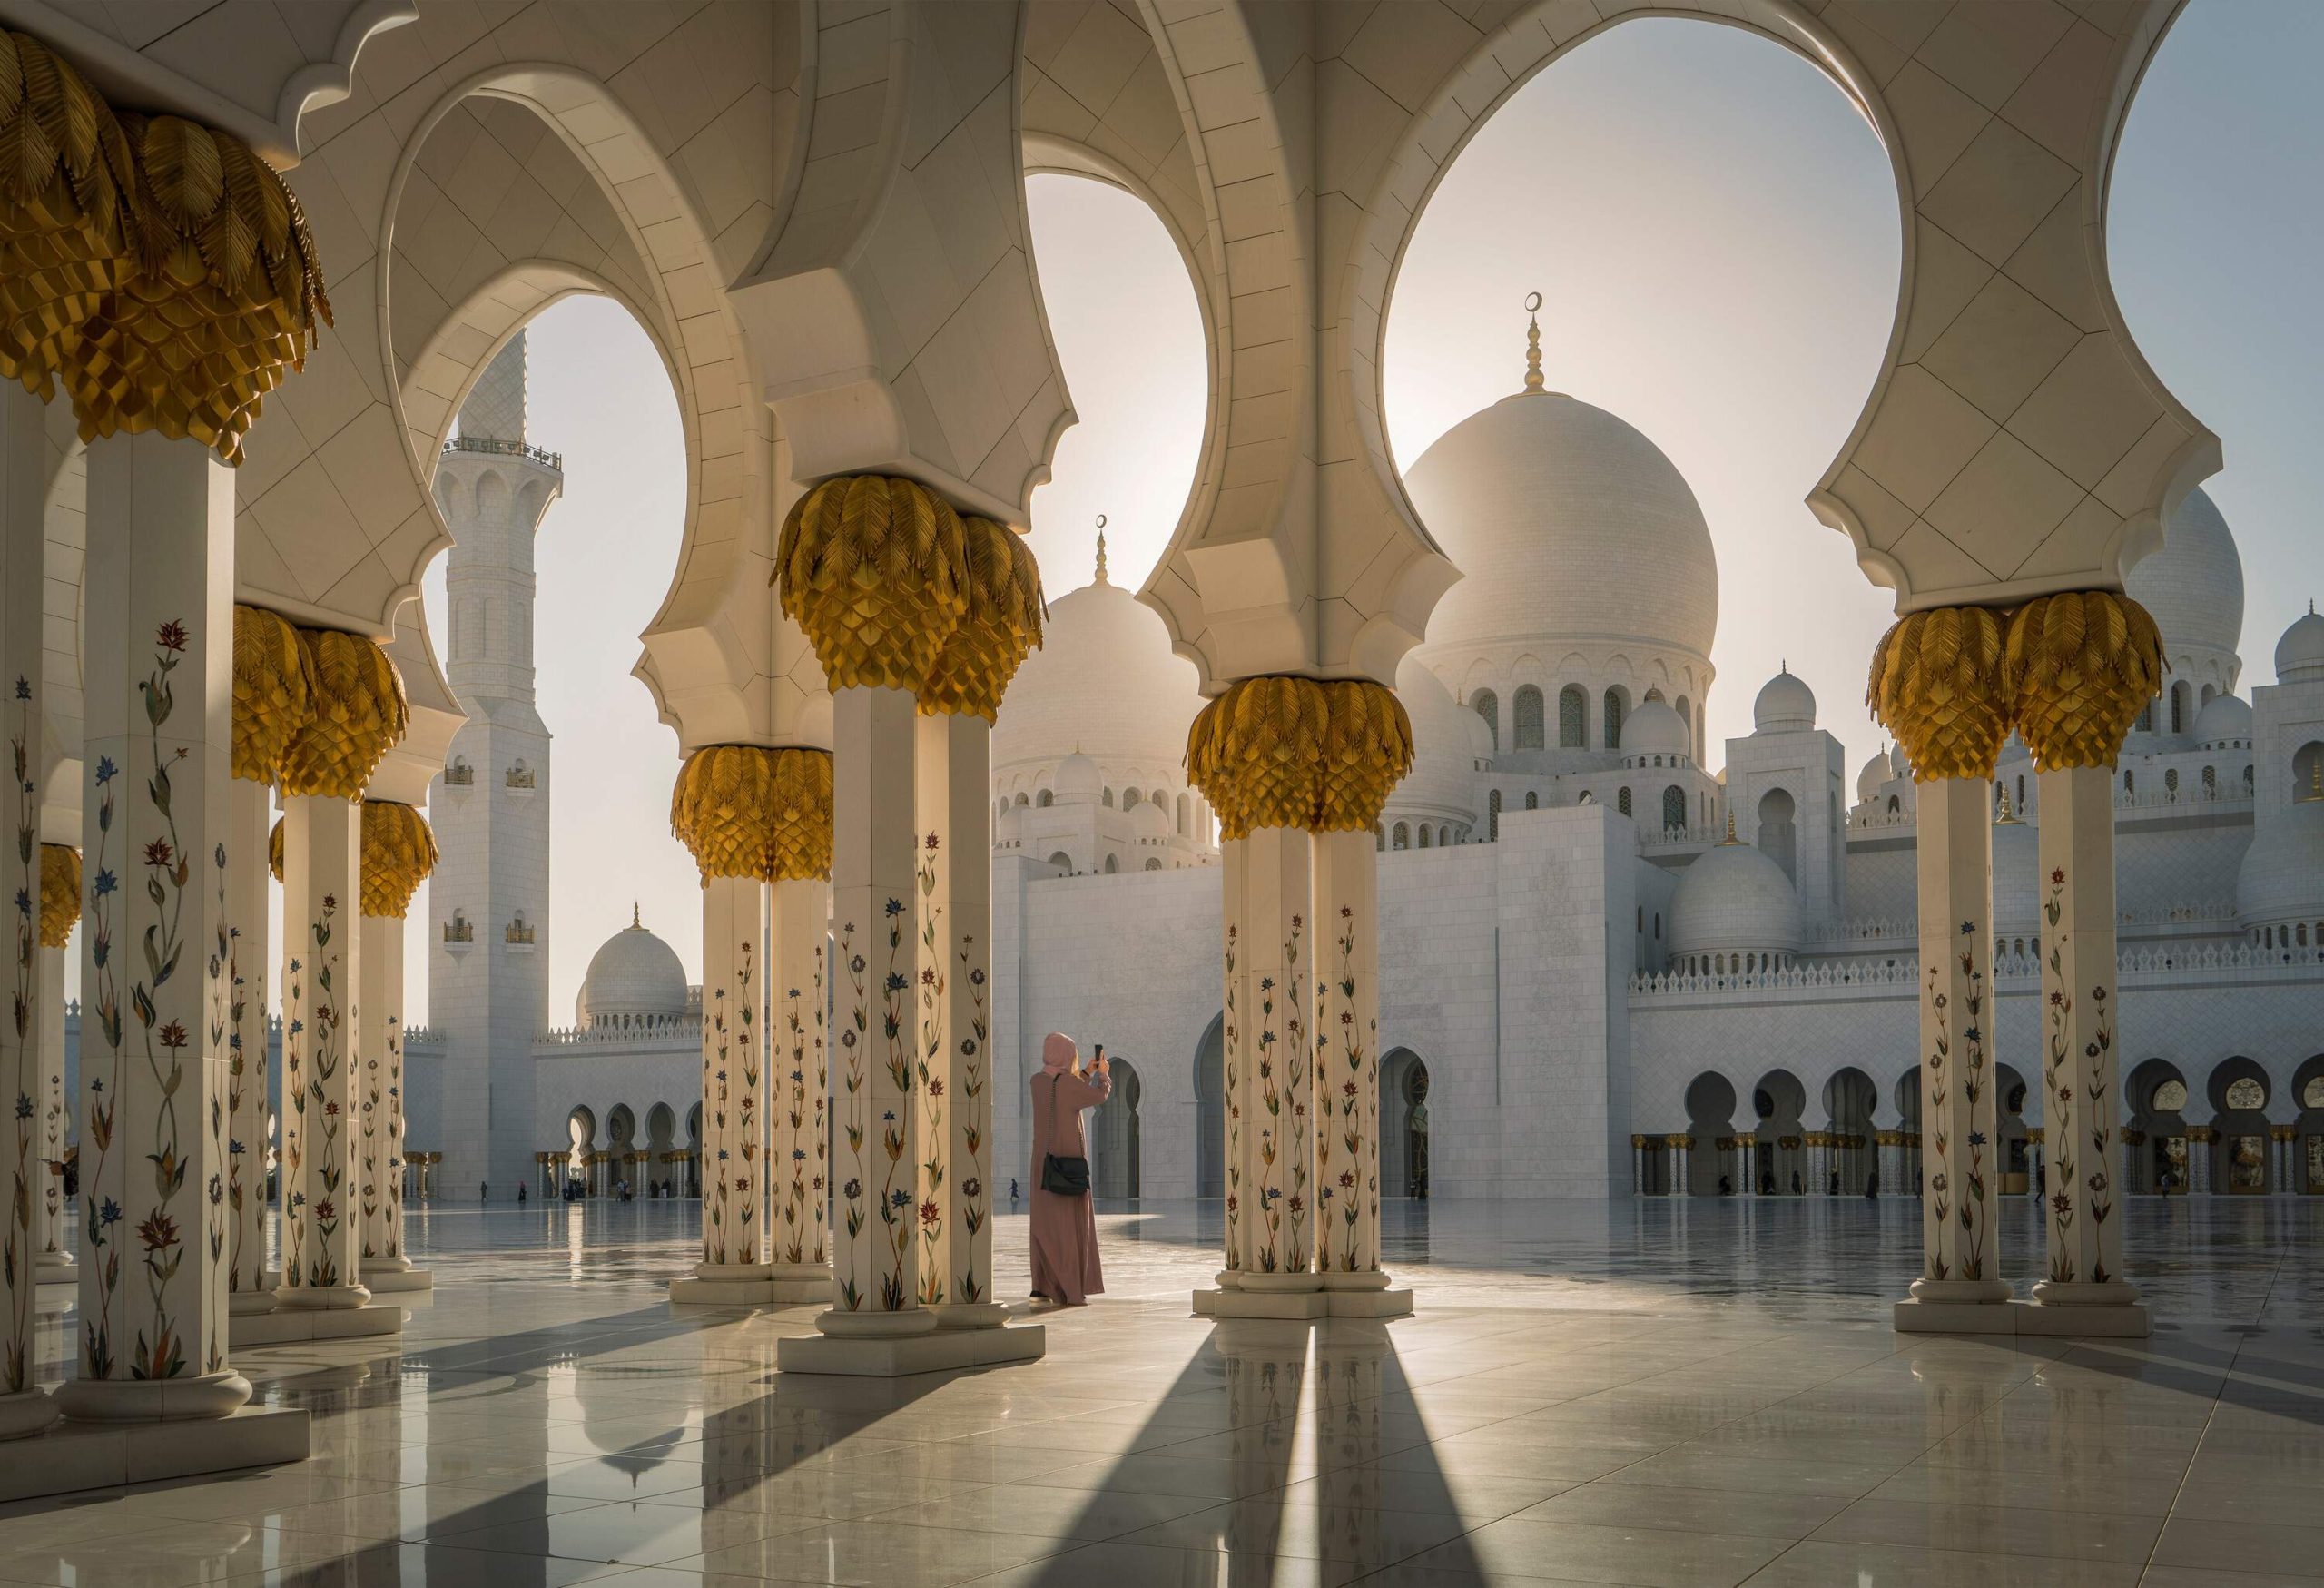 A woman in a robe standing inside the Sheikh Zayed Grand Mosque, taking a picture of the courtyard.